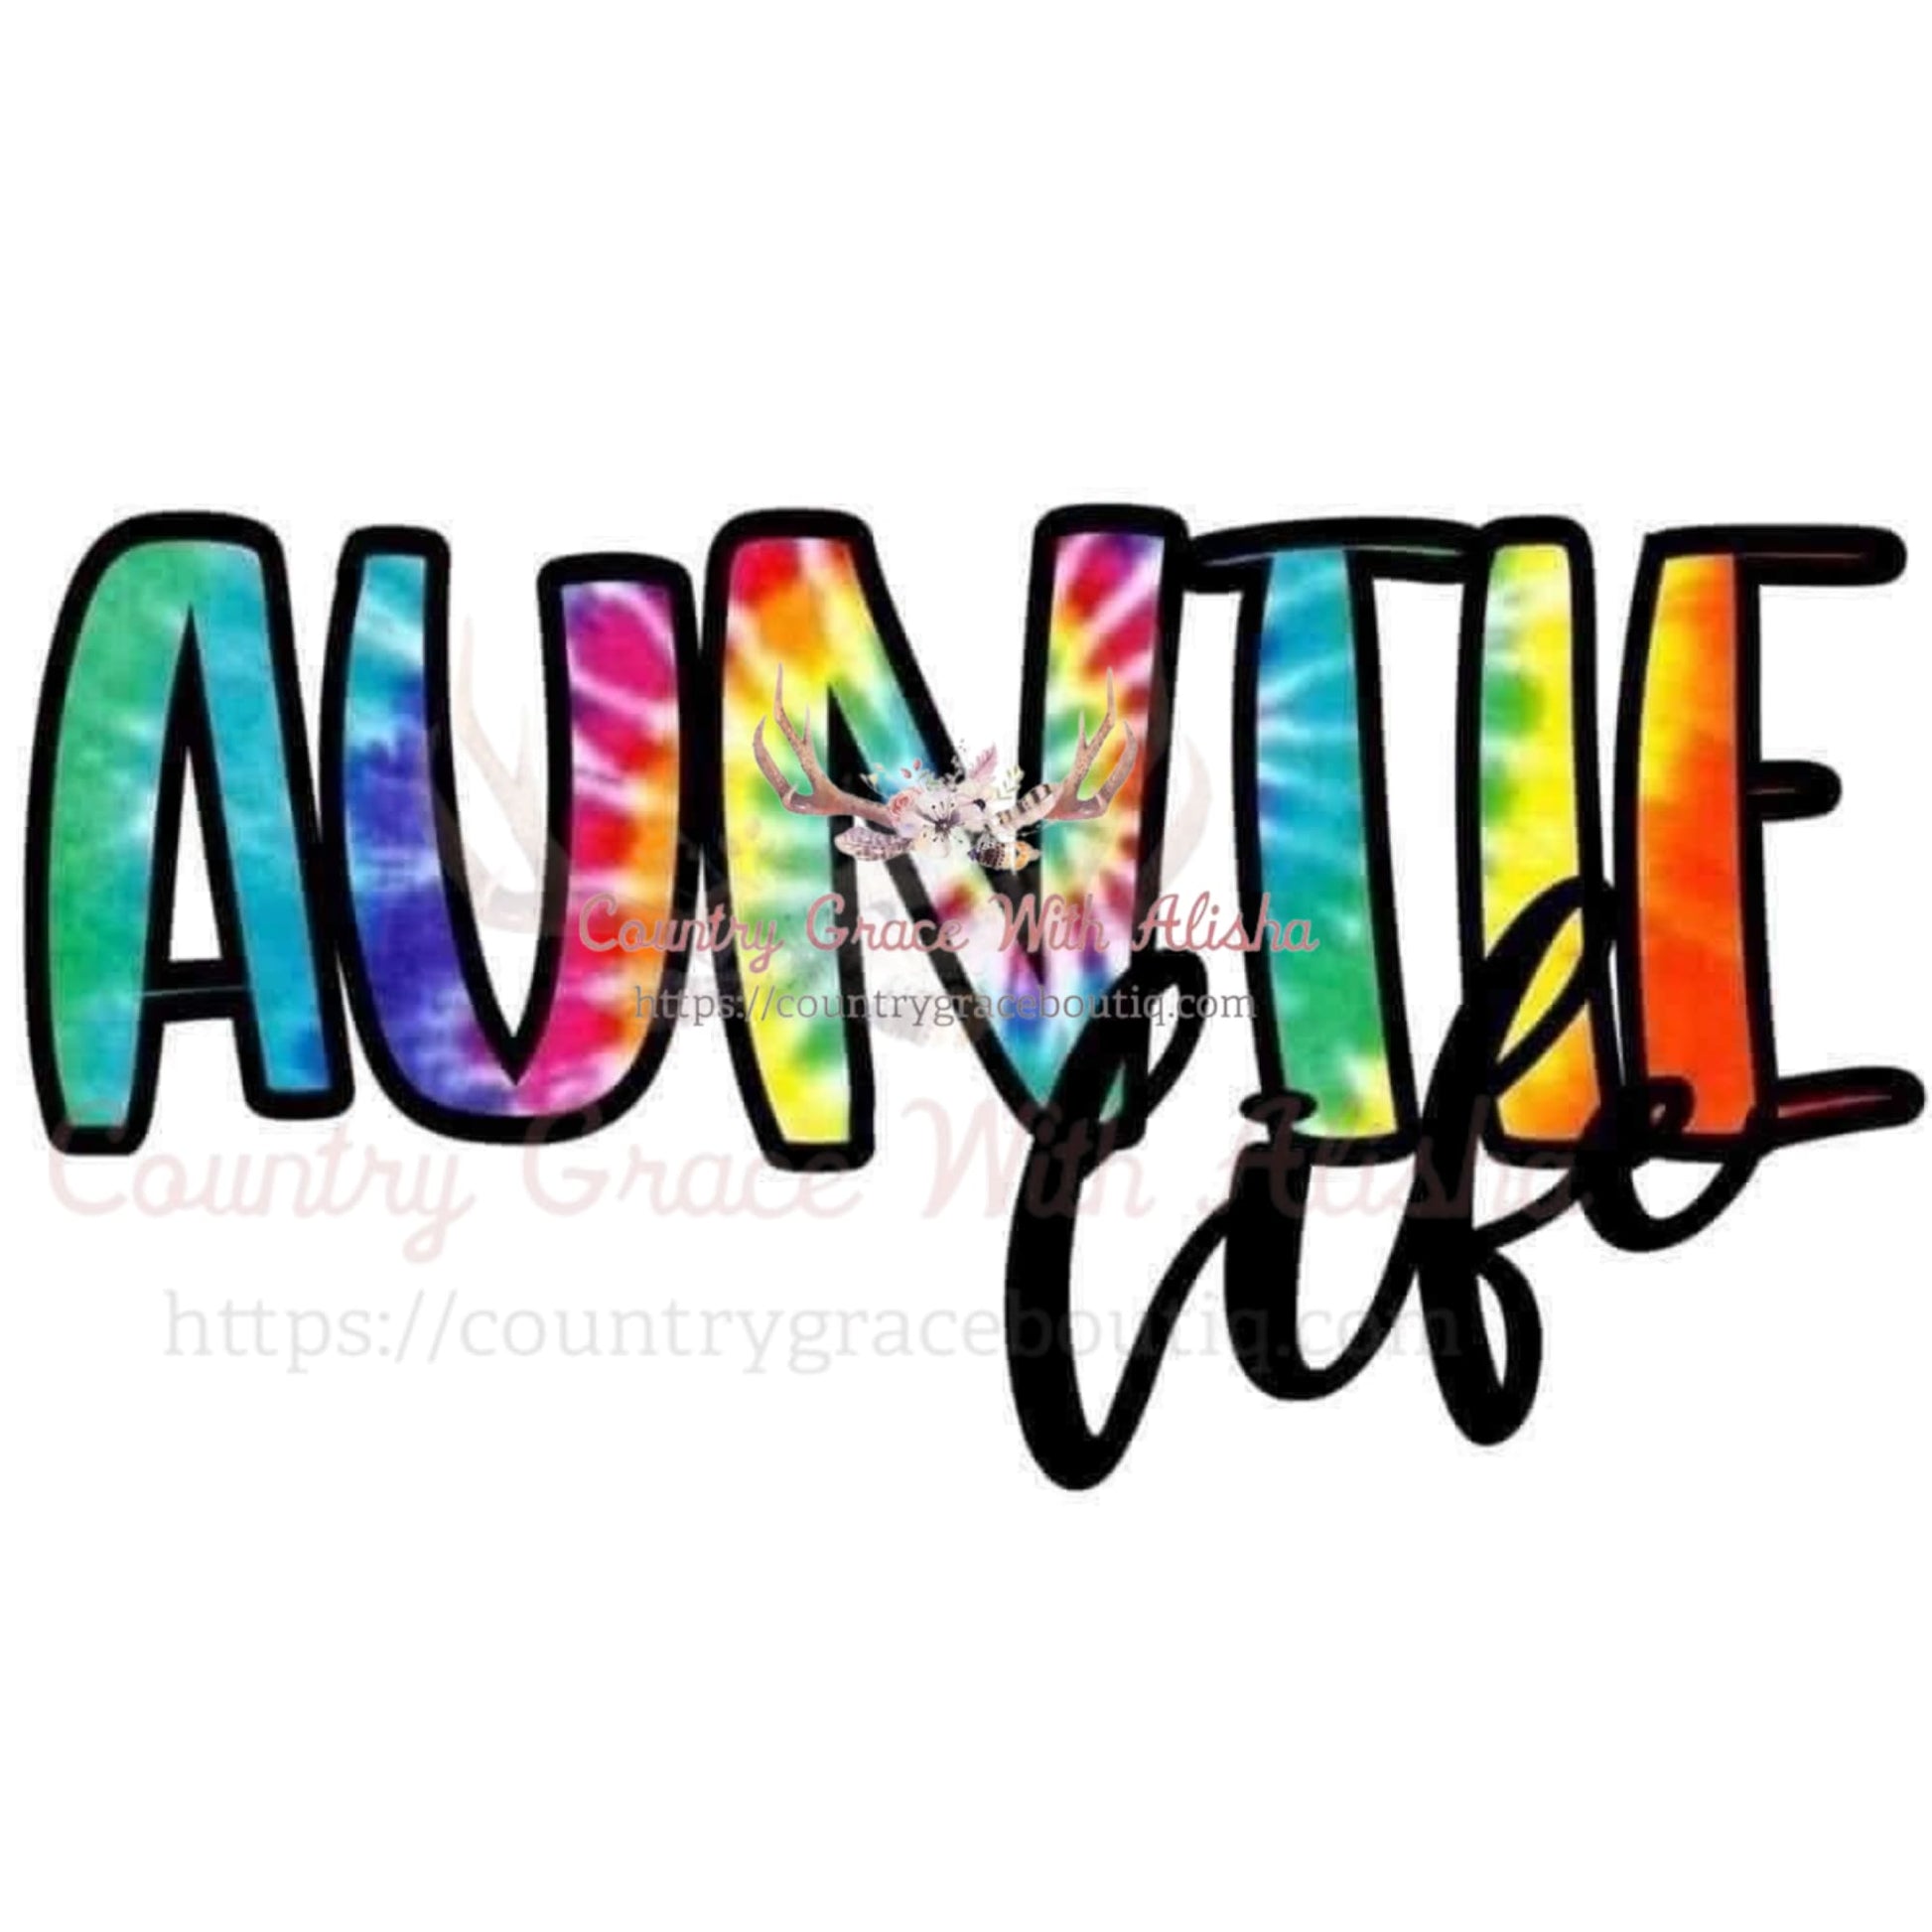 Auntie Life Tie Dye Sublimation Transfer - Sub $1.50 Country